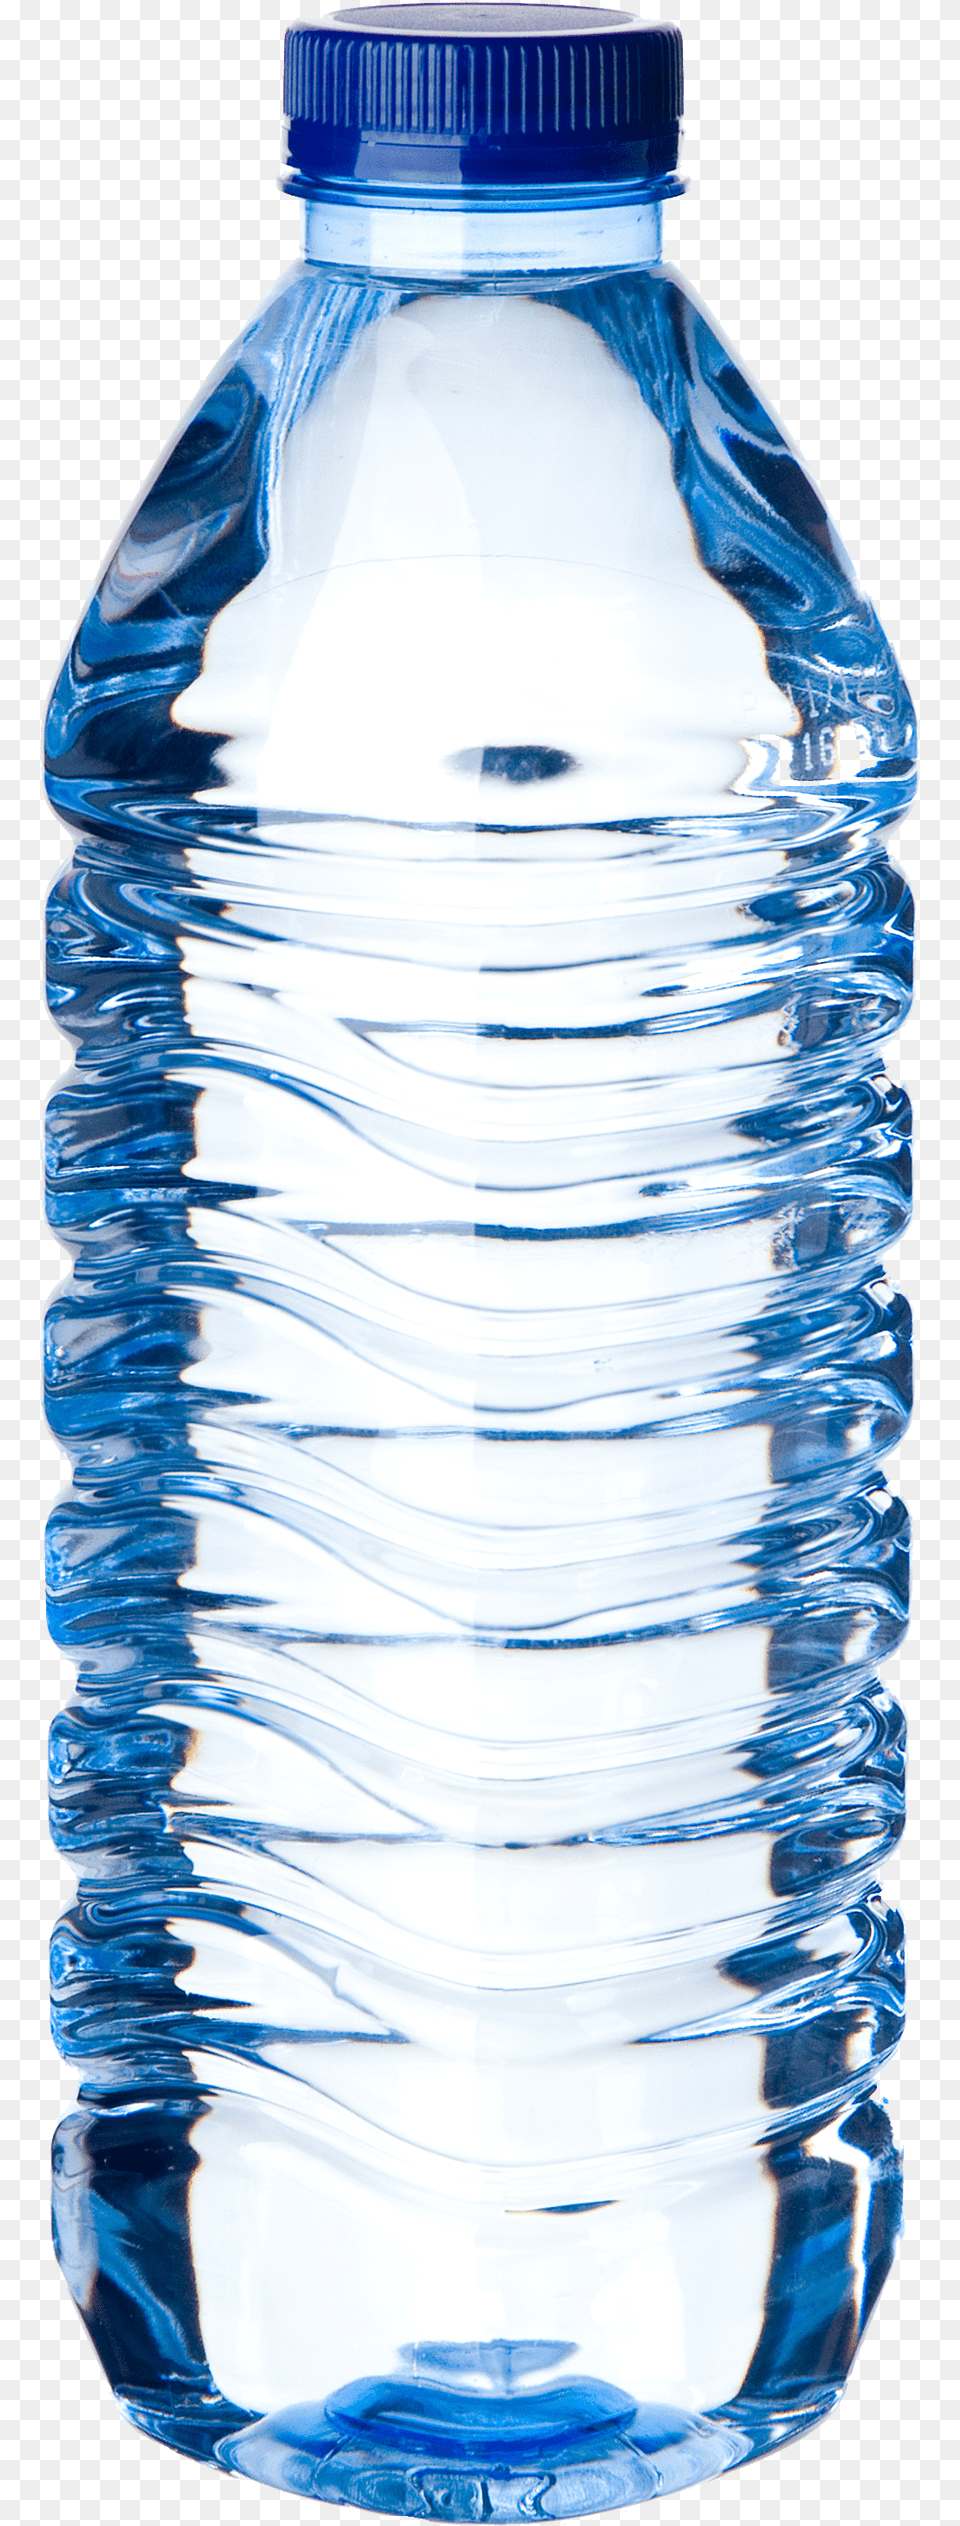 Bottle Of Water Picture Water Bottle File, Water Bottle, Beverage, Mineral Water, Plastic Free Png Download